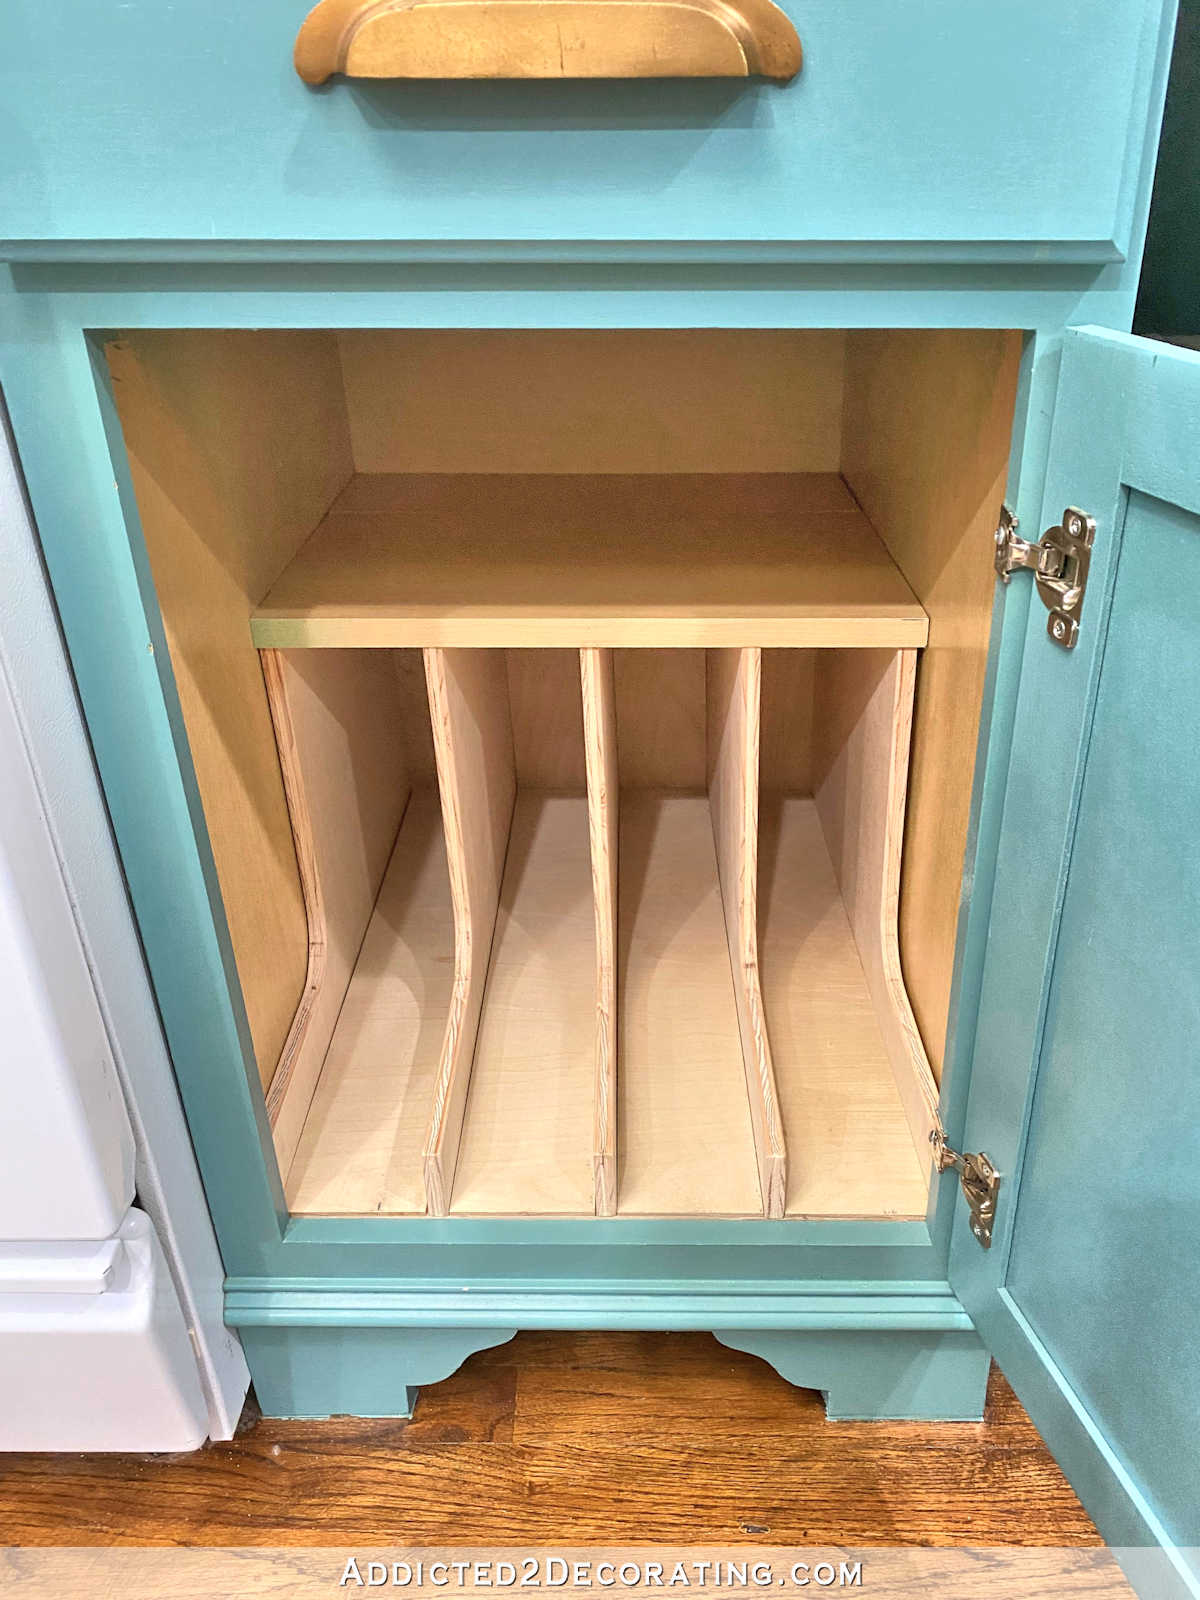 Assemble the DIY pan organizer using wood glue in the dadoes